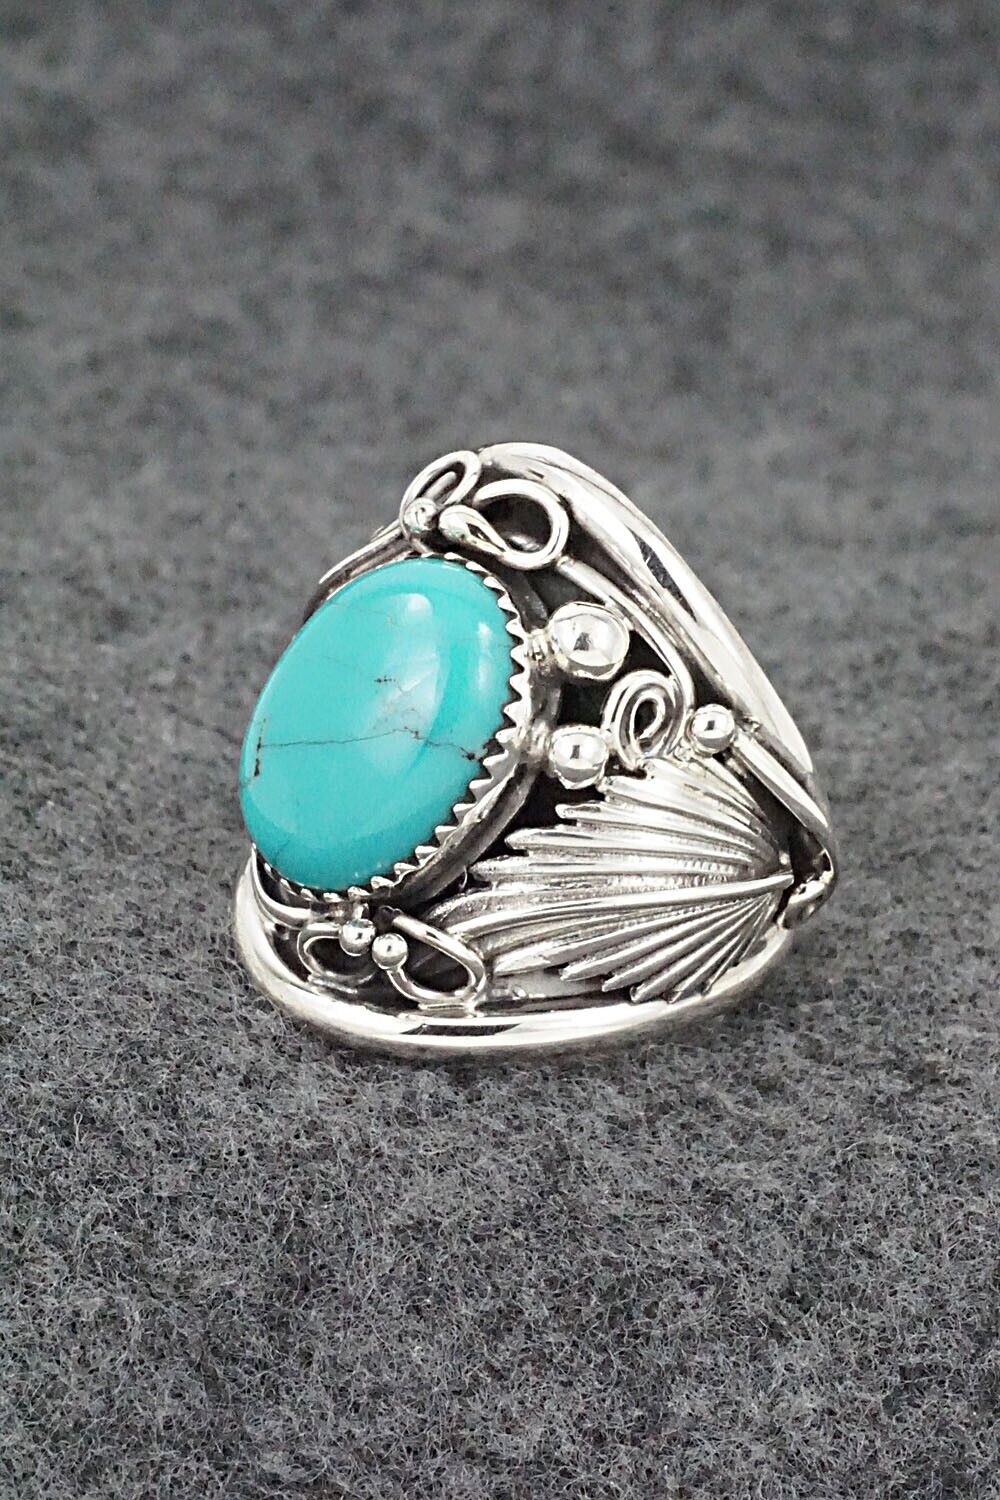 Turquoise & Sterling Silver Ring - Jeannette Saunders - Size 11